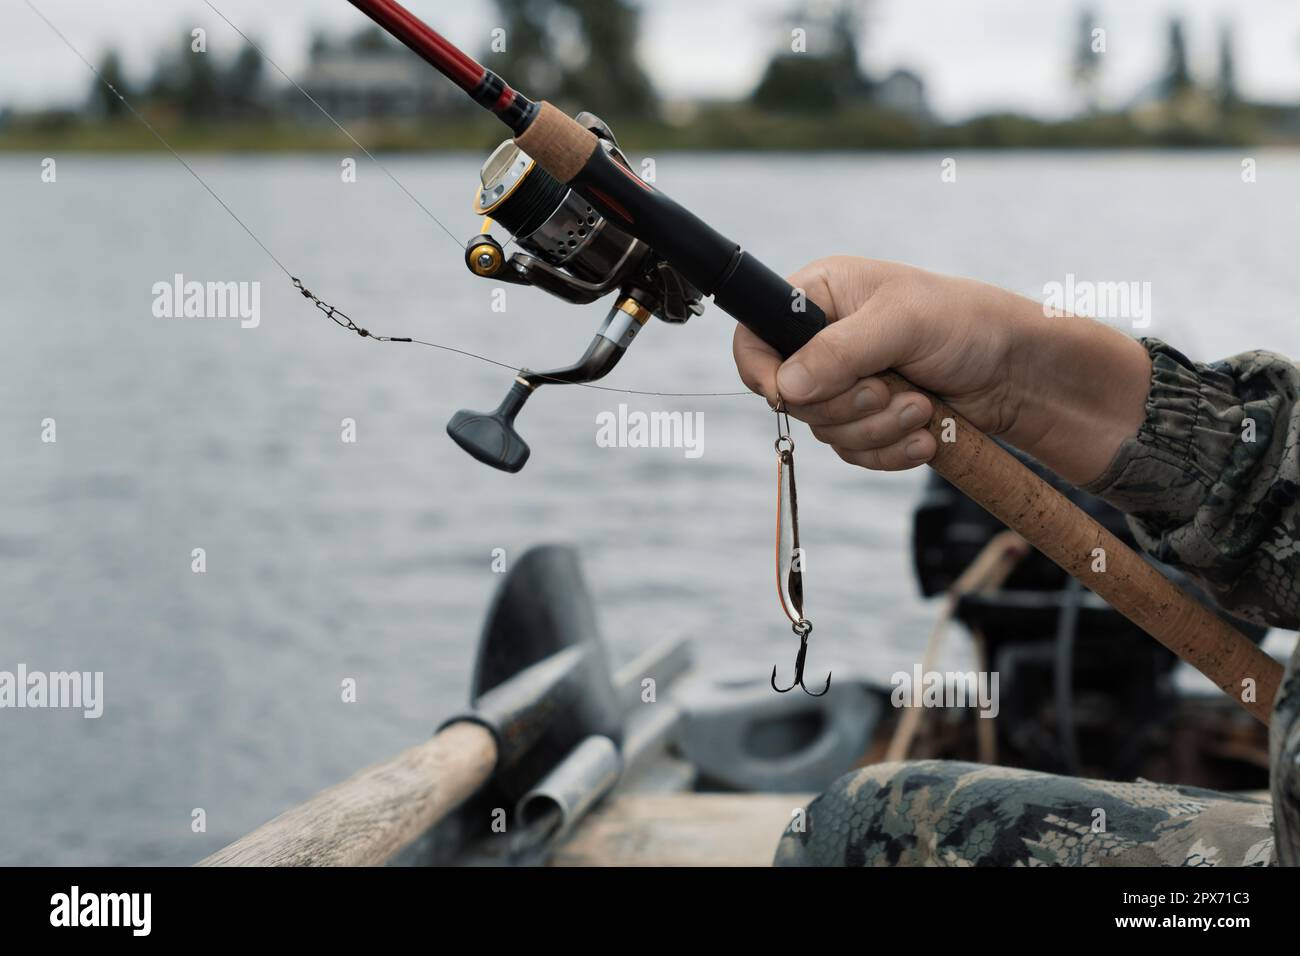 Fisherman holding spinning rod with fishing reel and fishing lure in hand in boat, close up Stock Photo